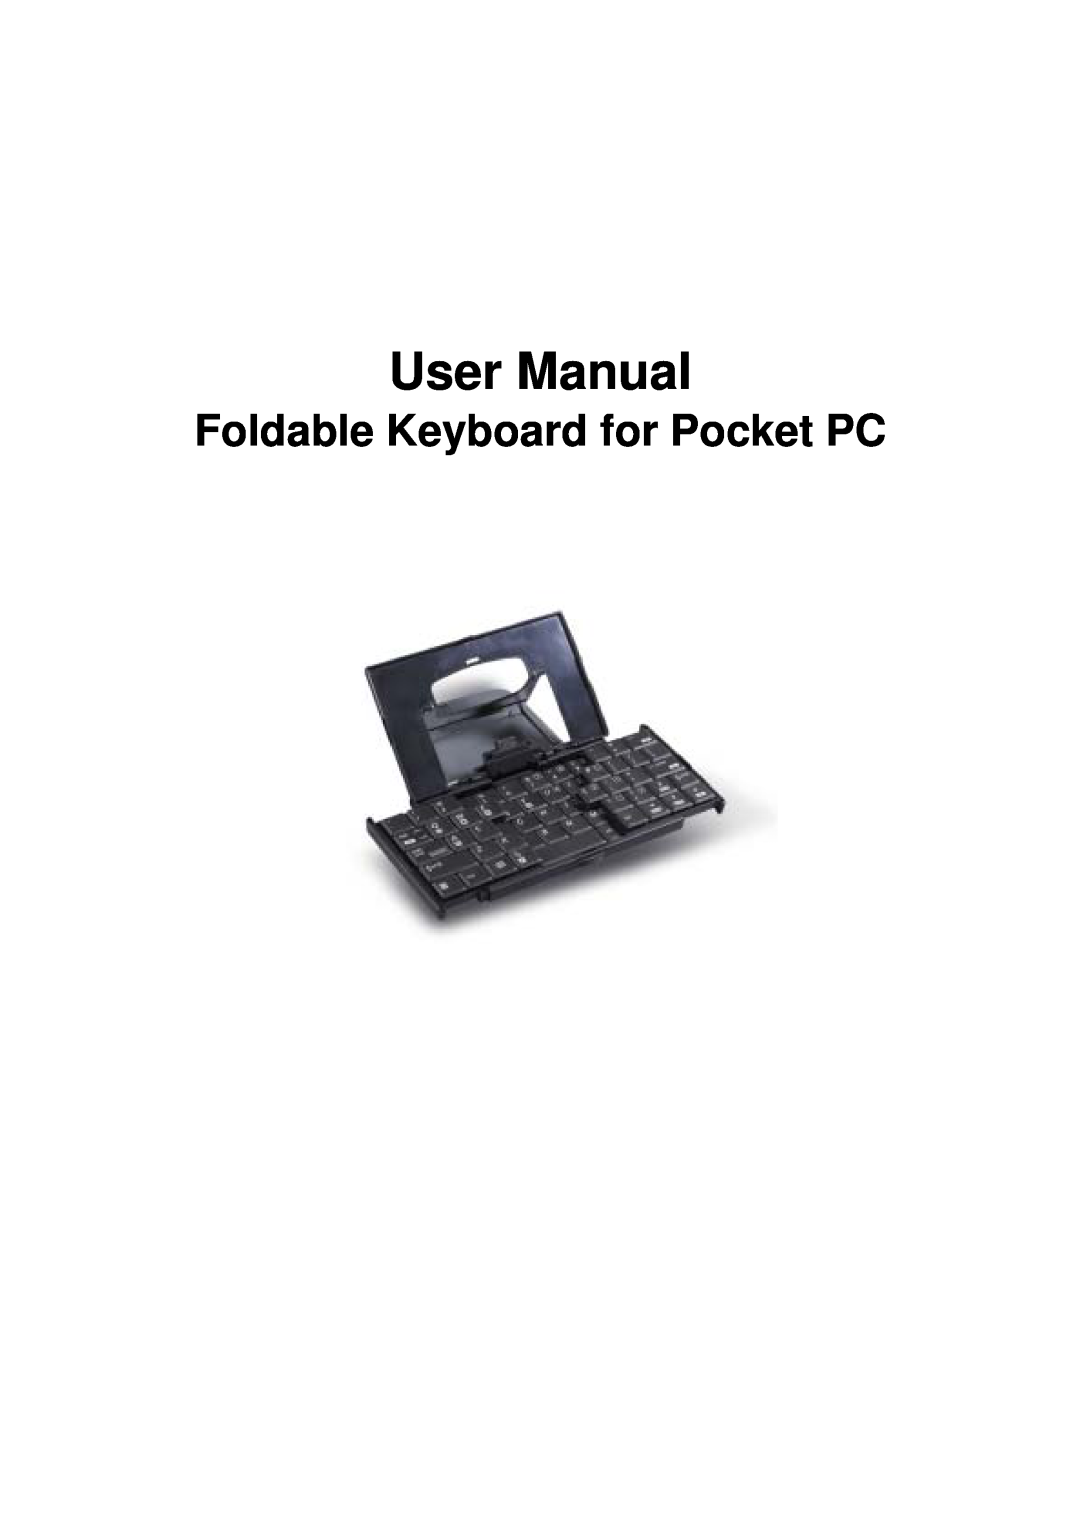 Dell Foldable Keyboard for Pocket PC user manual User Manual 